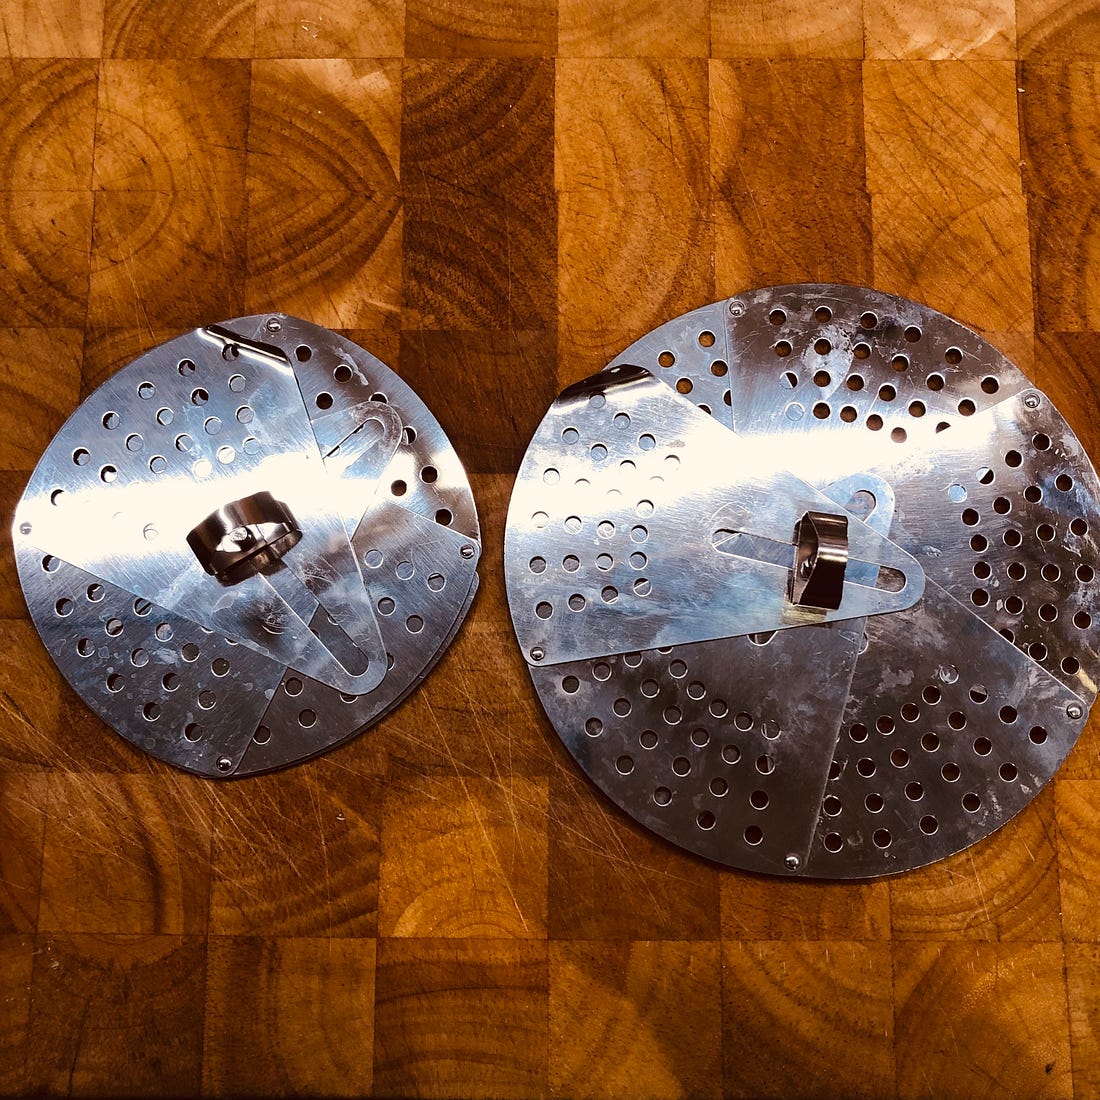 Two metal adjustable drop lids. The lid on the left is smaller in diameter. The lid on the right has been expanded so it is larger. 